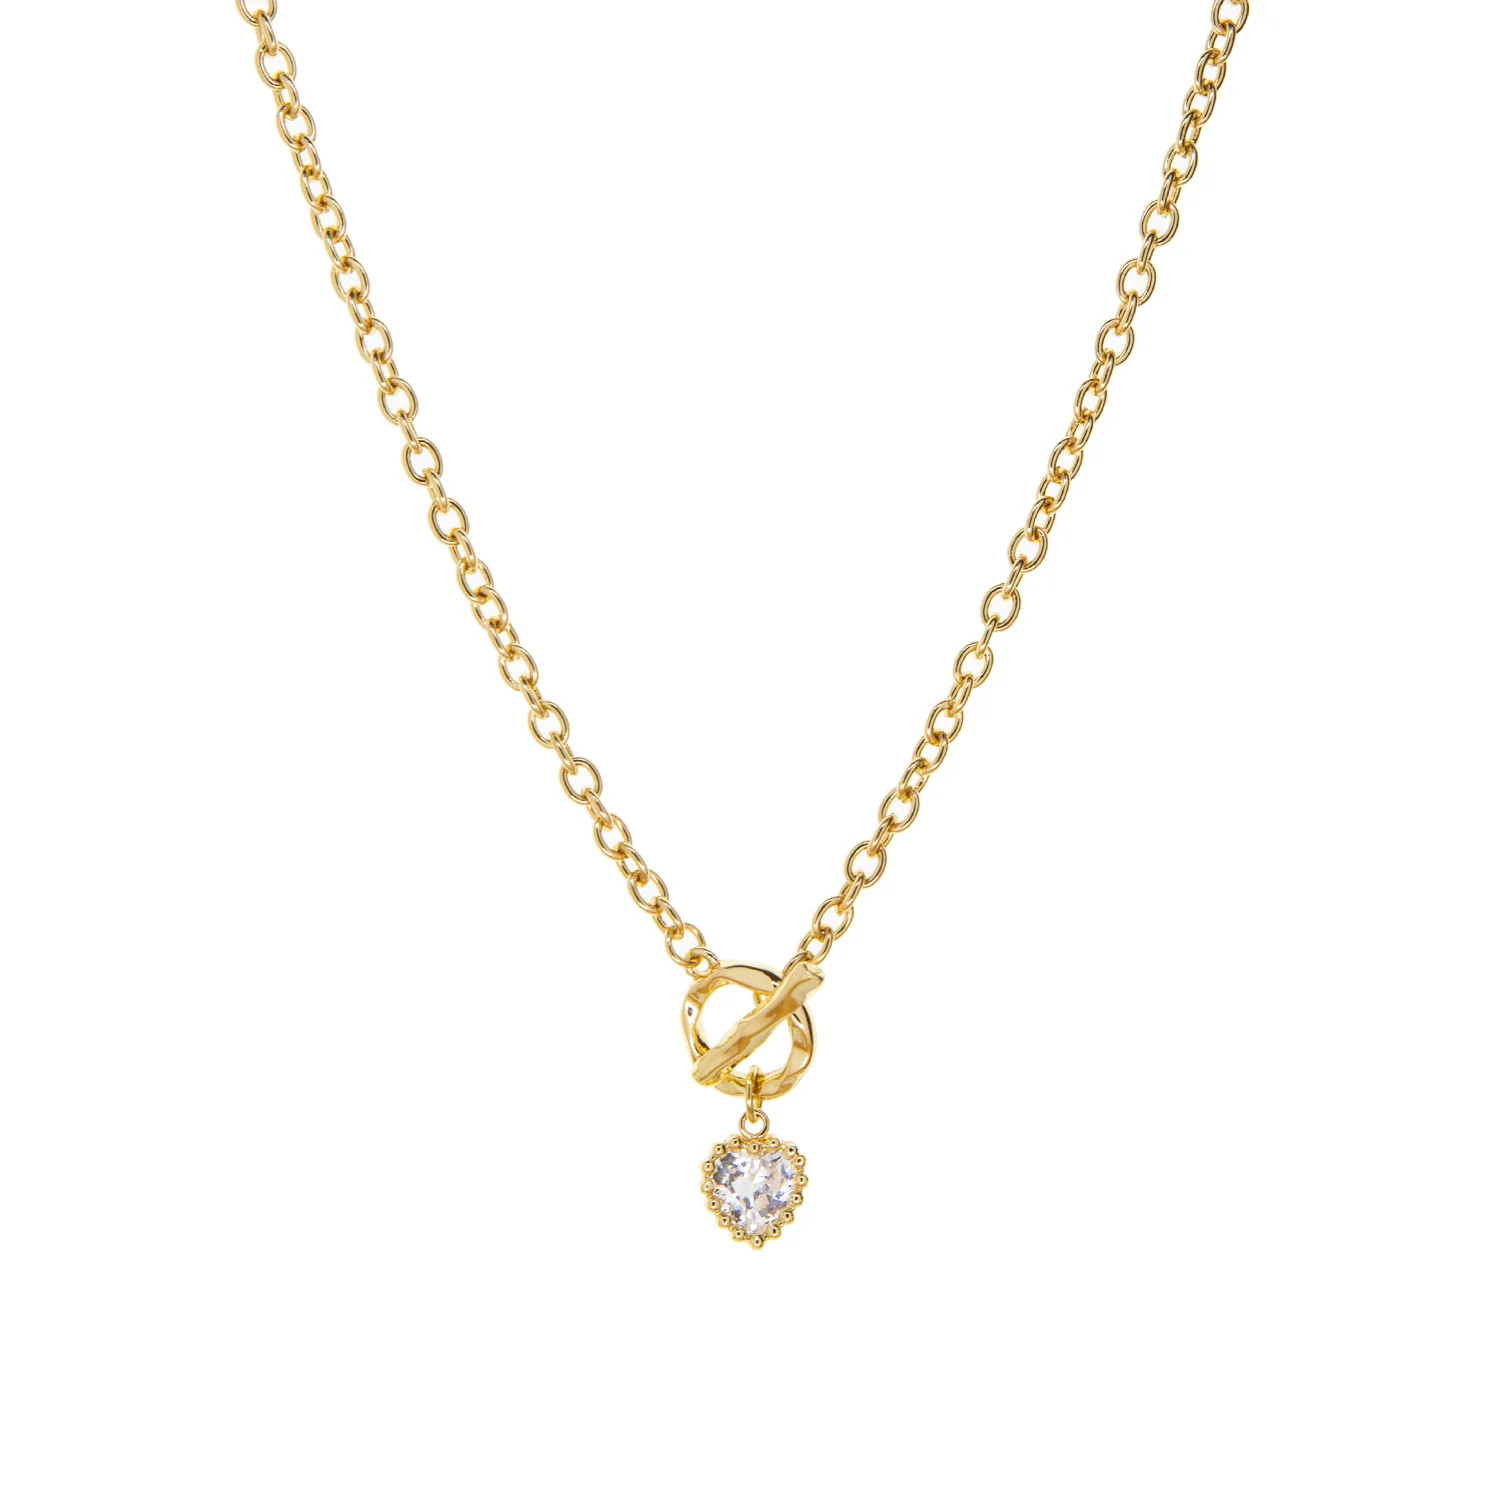 crystal heart chain necklace | Marlyn Schiff